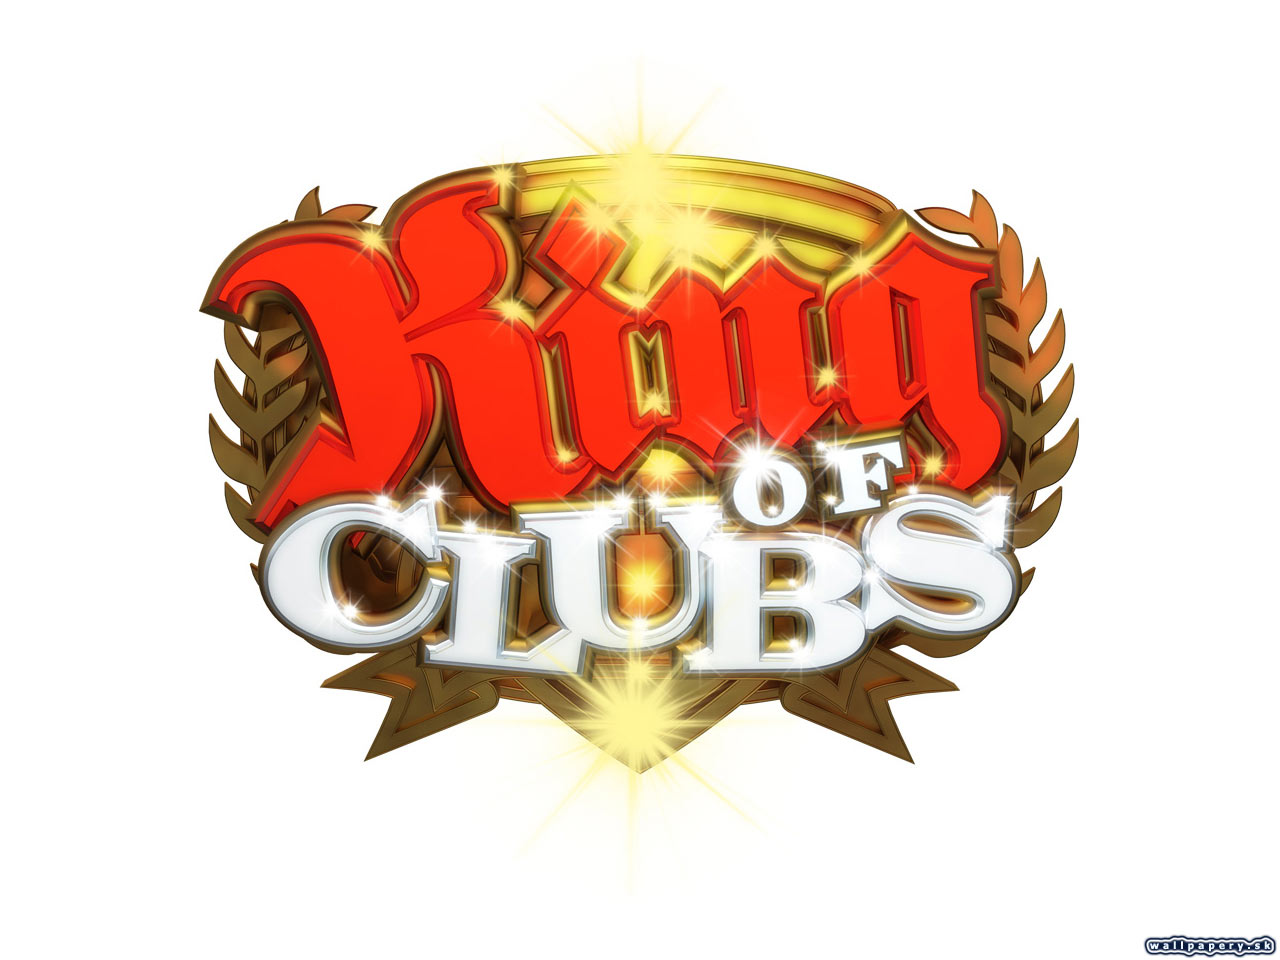 King of Clubs - wallpaper 1